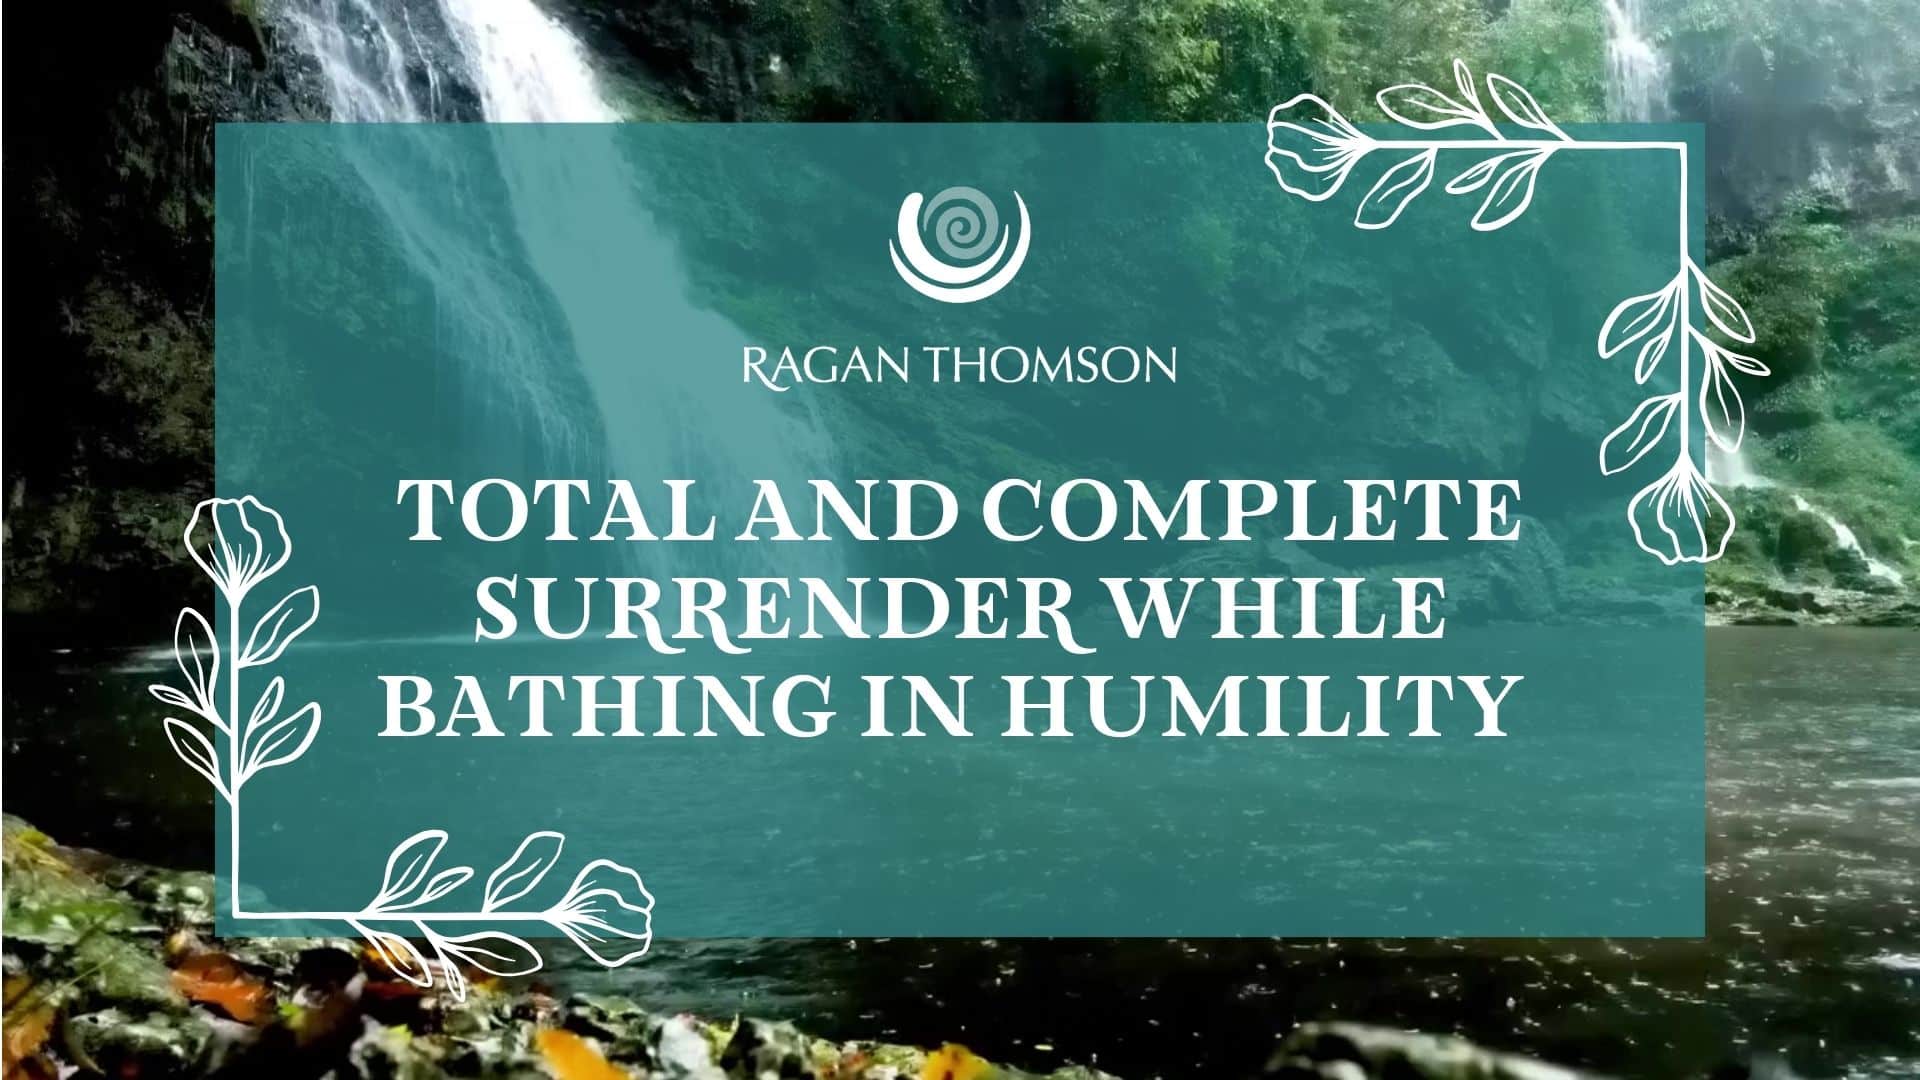 Steps on the Journey - Transmission from Spirit: Total and complete surrender while bathing in humility